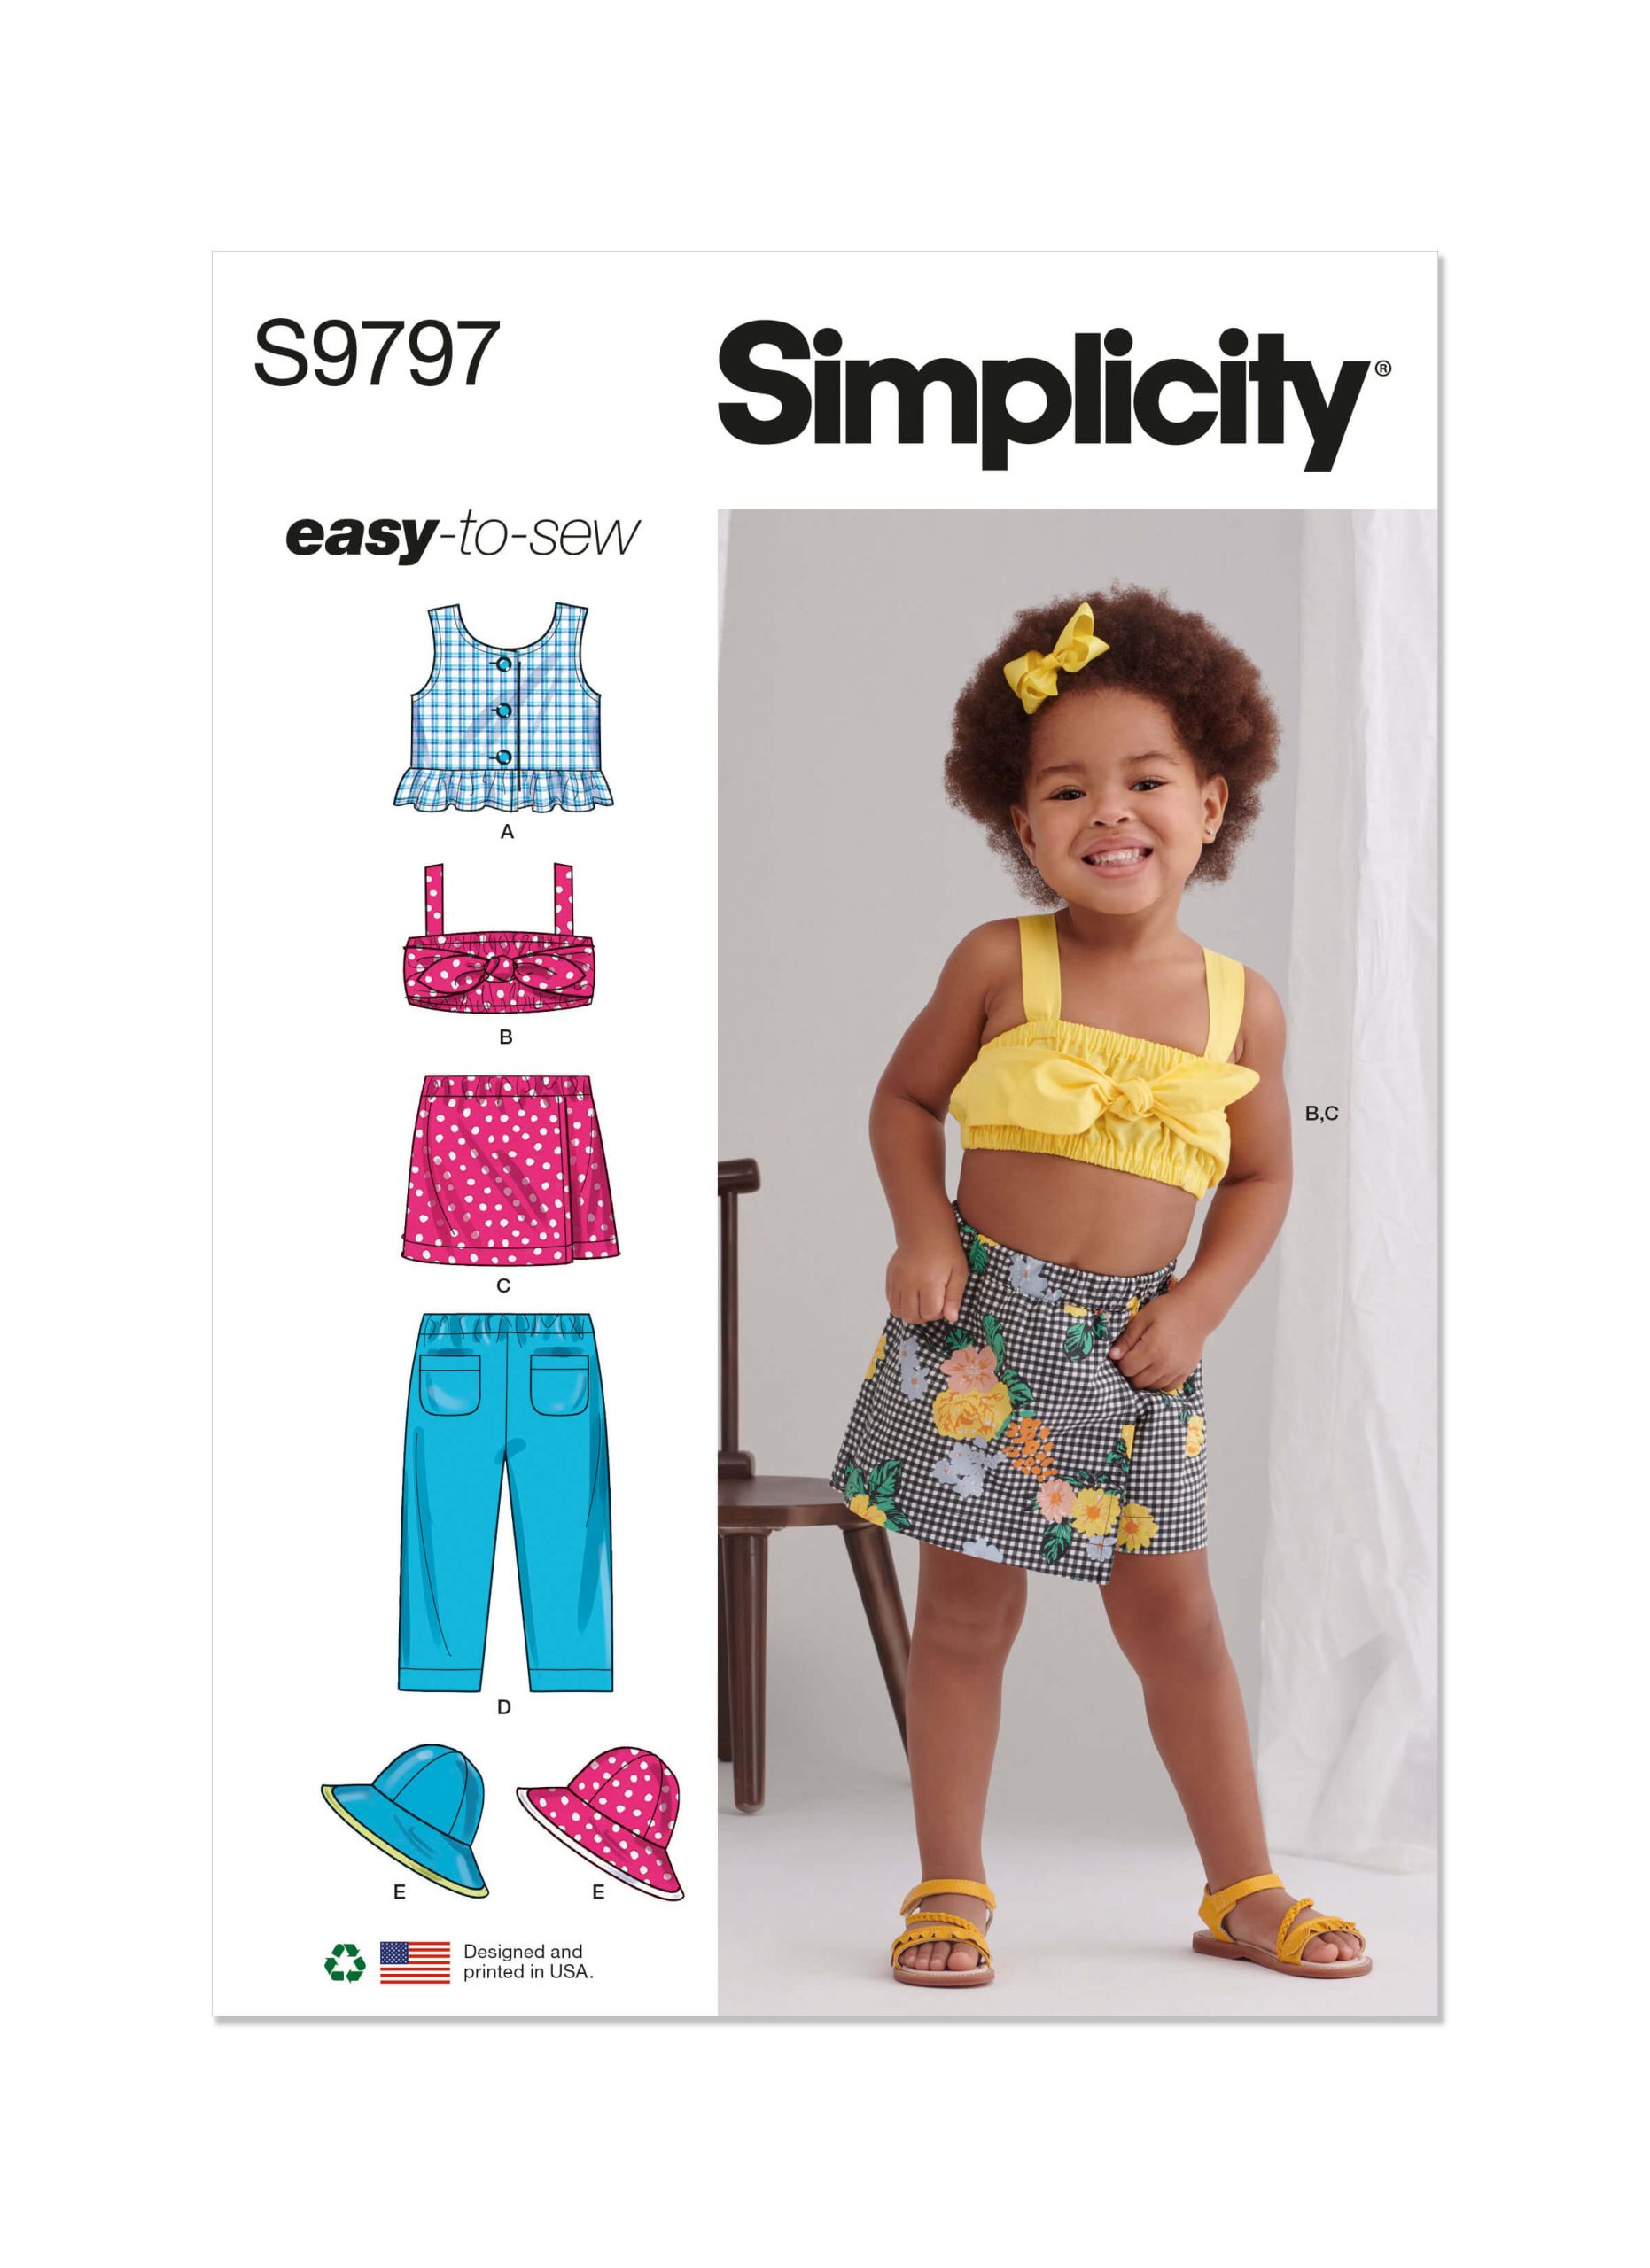 Simplicity Sewing Pattern S9797 Toddlers' Tops, Skort, Trousers and Hat in Three Sizes